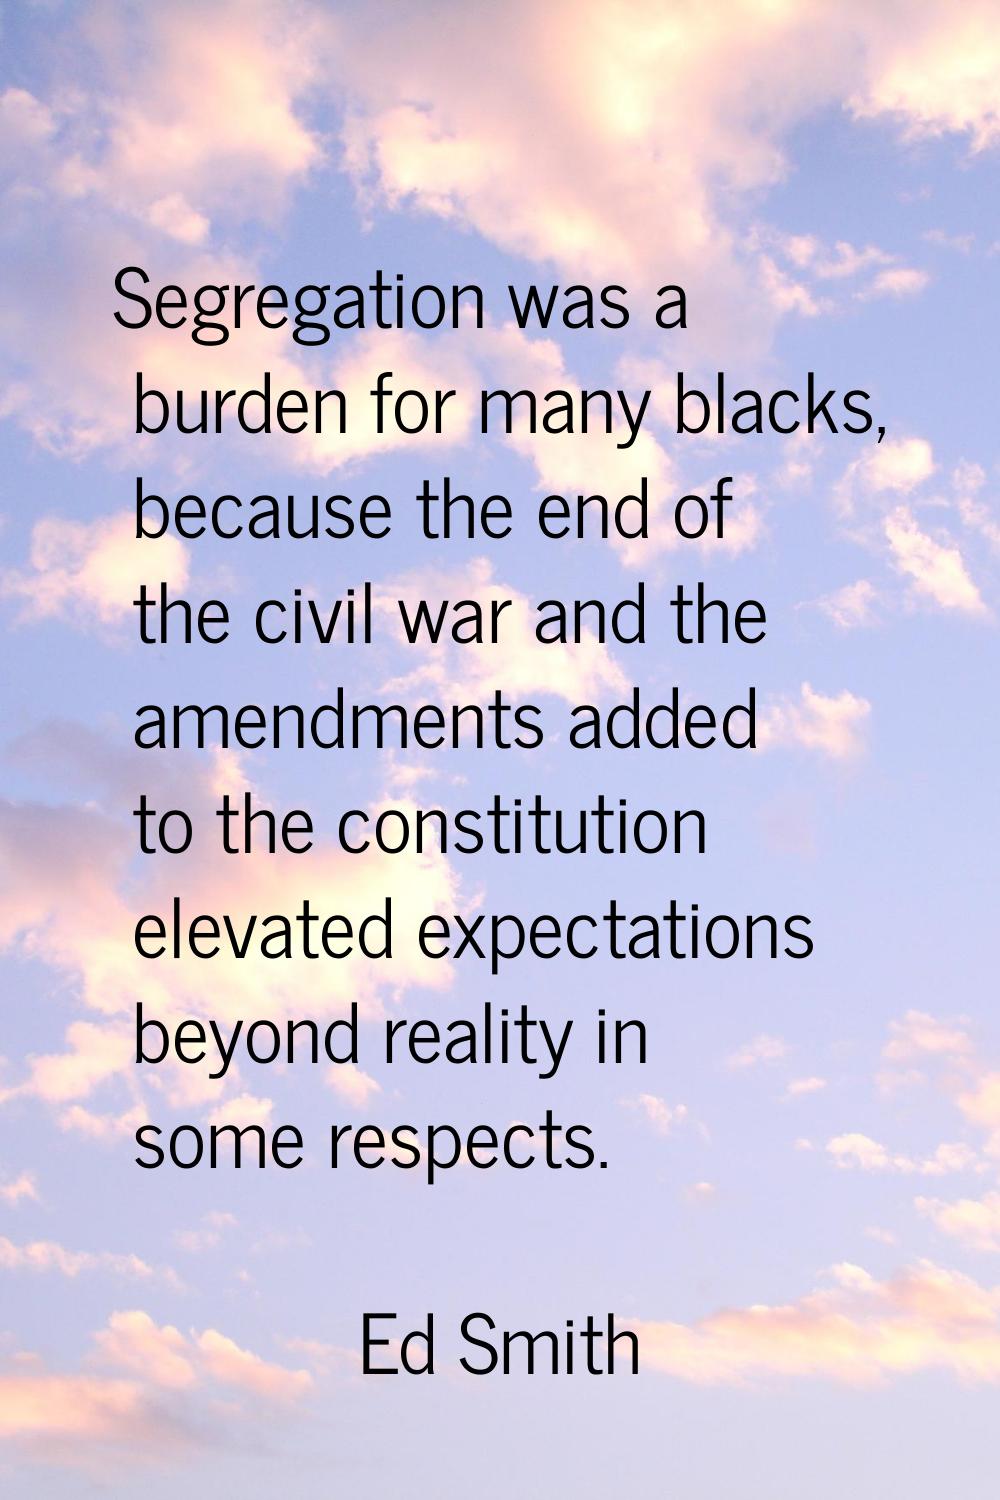 Segregation was a burden for many blacks, because the end of the civil war and the amendments added